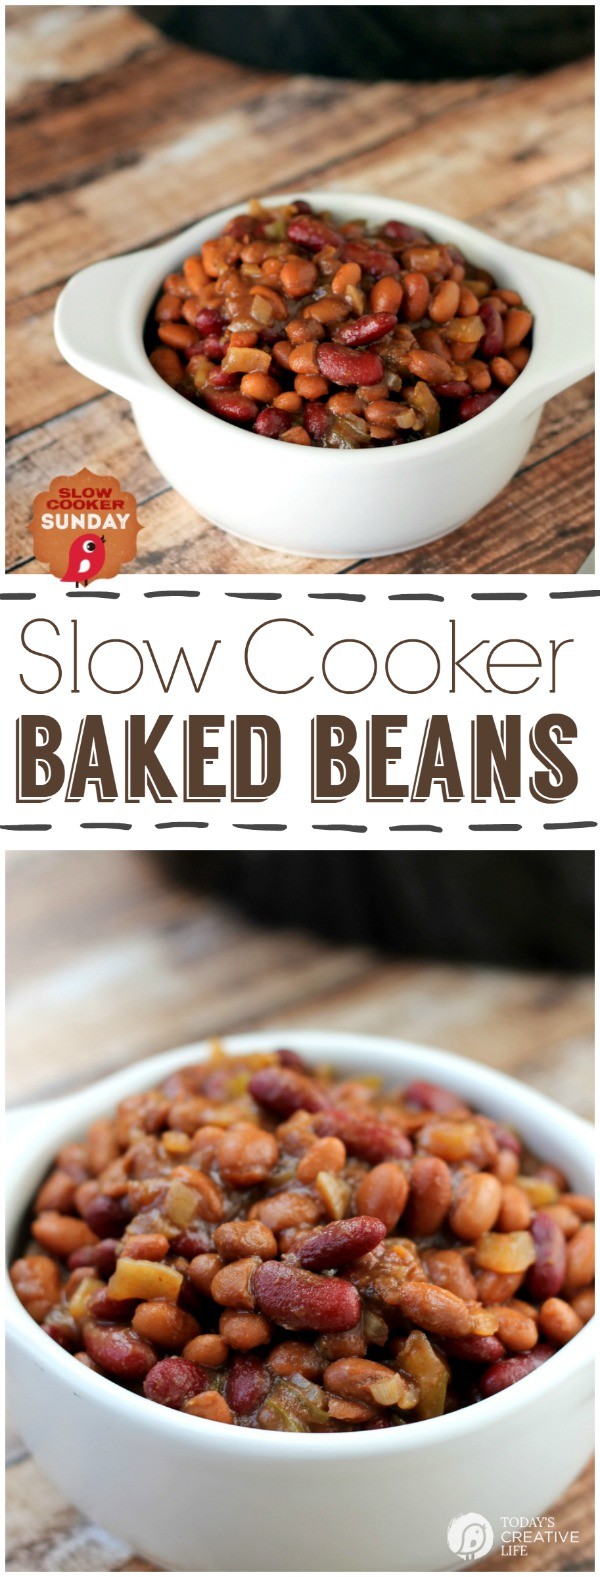 Slow Cooker BBQ Baked Beans | BBQ Beans | Crockpot Baked Beans | Free up the stove top for this summer favorite. See more Slow Cooker Sunday recipes on TodaysCreativelife.com